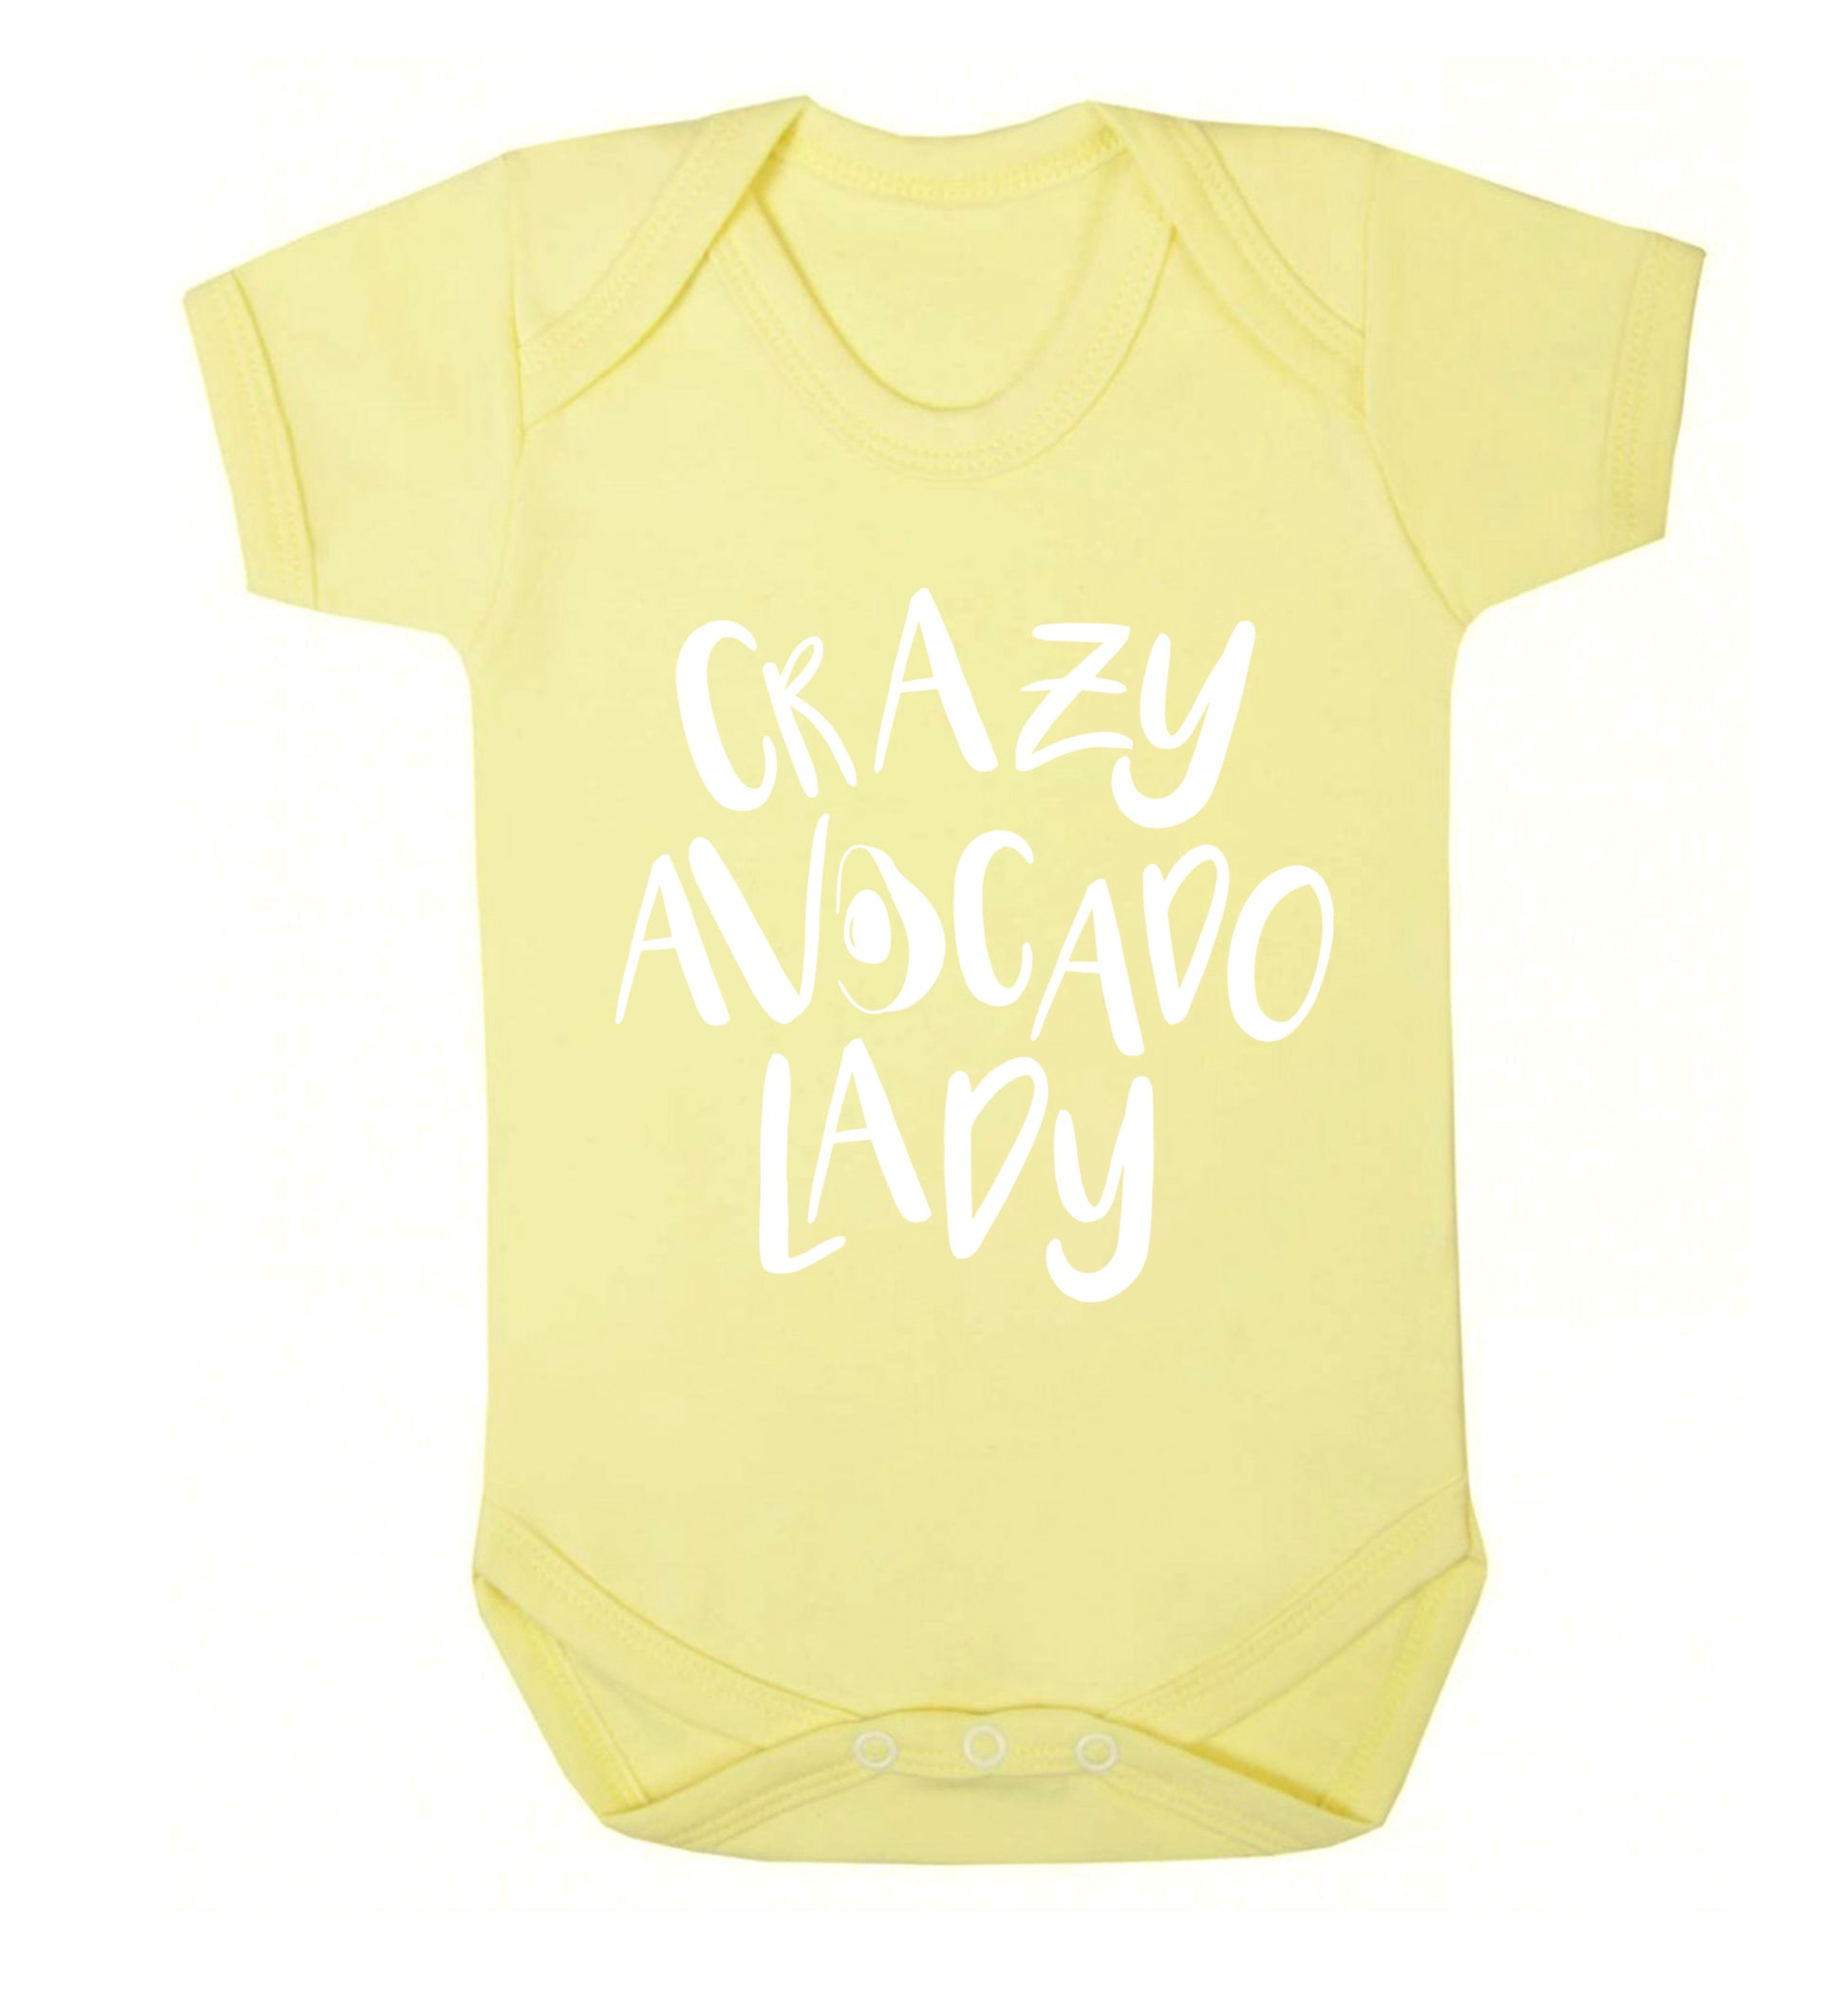 Crazy avocado lady Baby Vest pale yellow 18-24 months